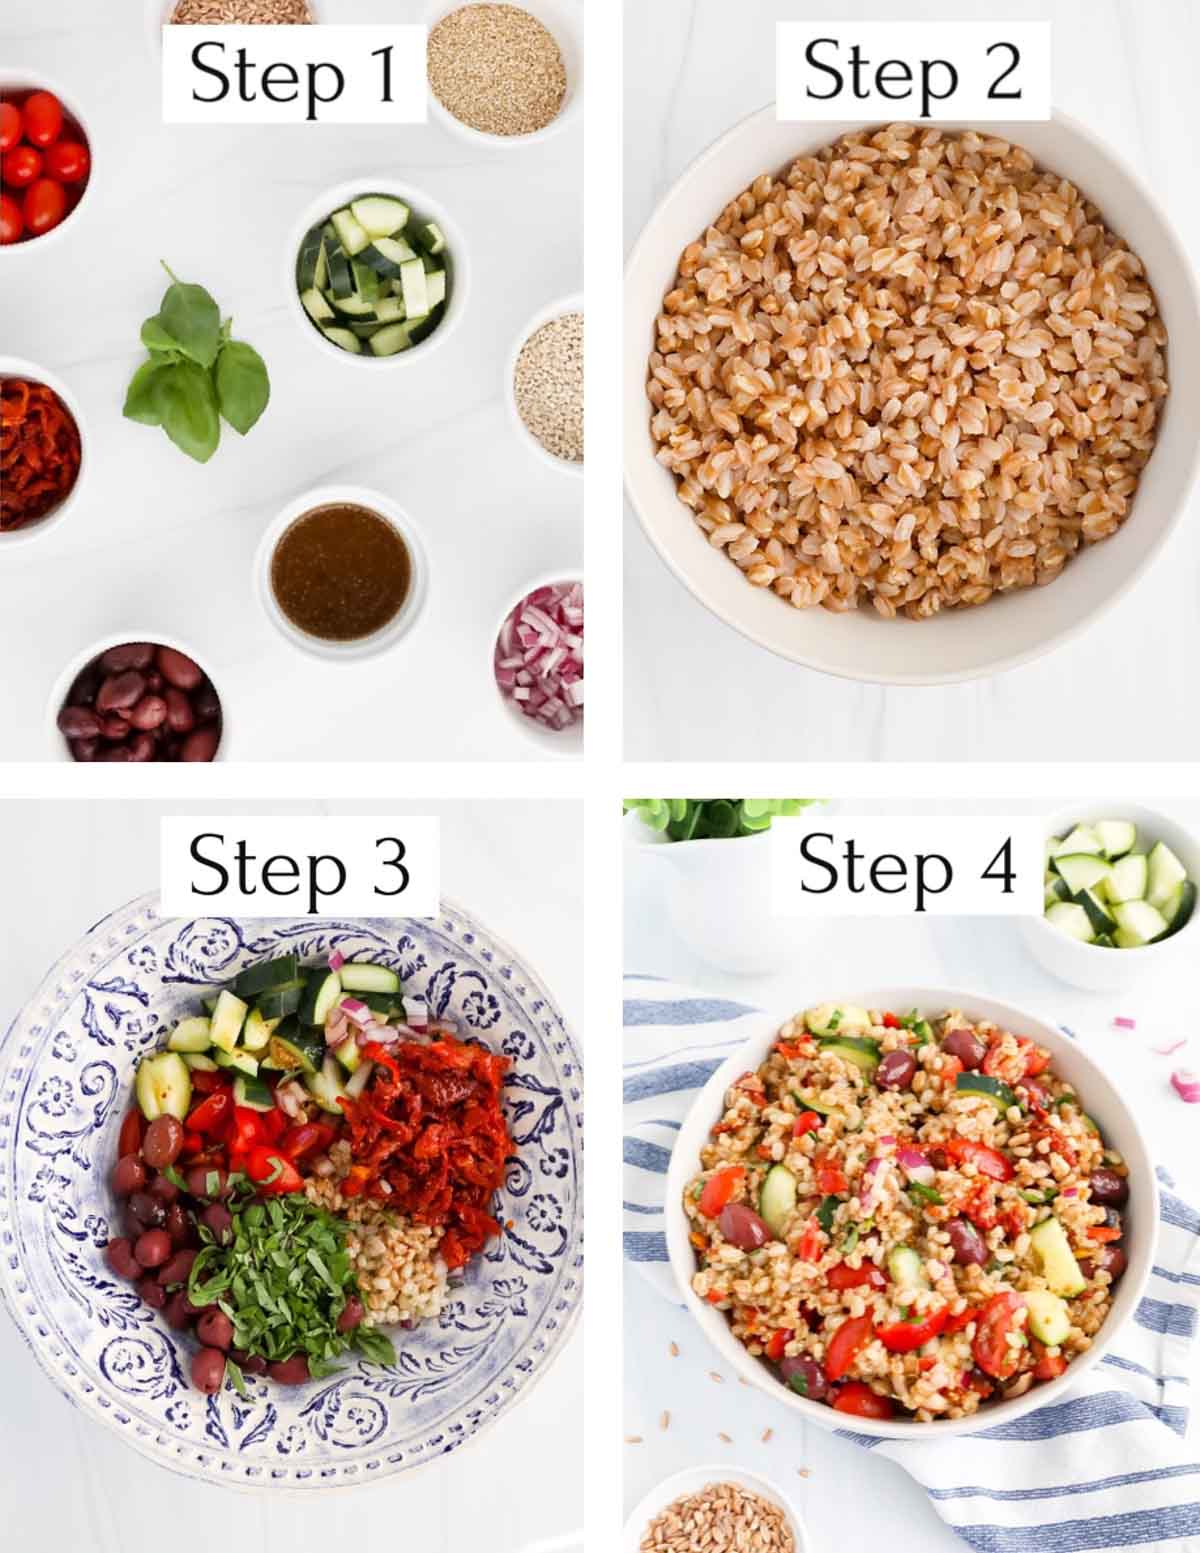 Four step-by-step pictures labeled step 1-step 4. Step 1: ingredients for a salad in small white bowls, step two: a bowl of grain, step 3: a bowl filled with cucumbers, olives, peppers, tomatoes, grains, and basil, step 4: all of the ingredients tossed together.